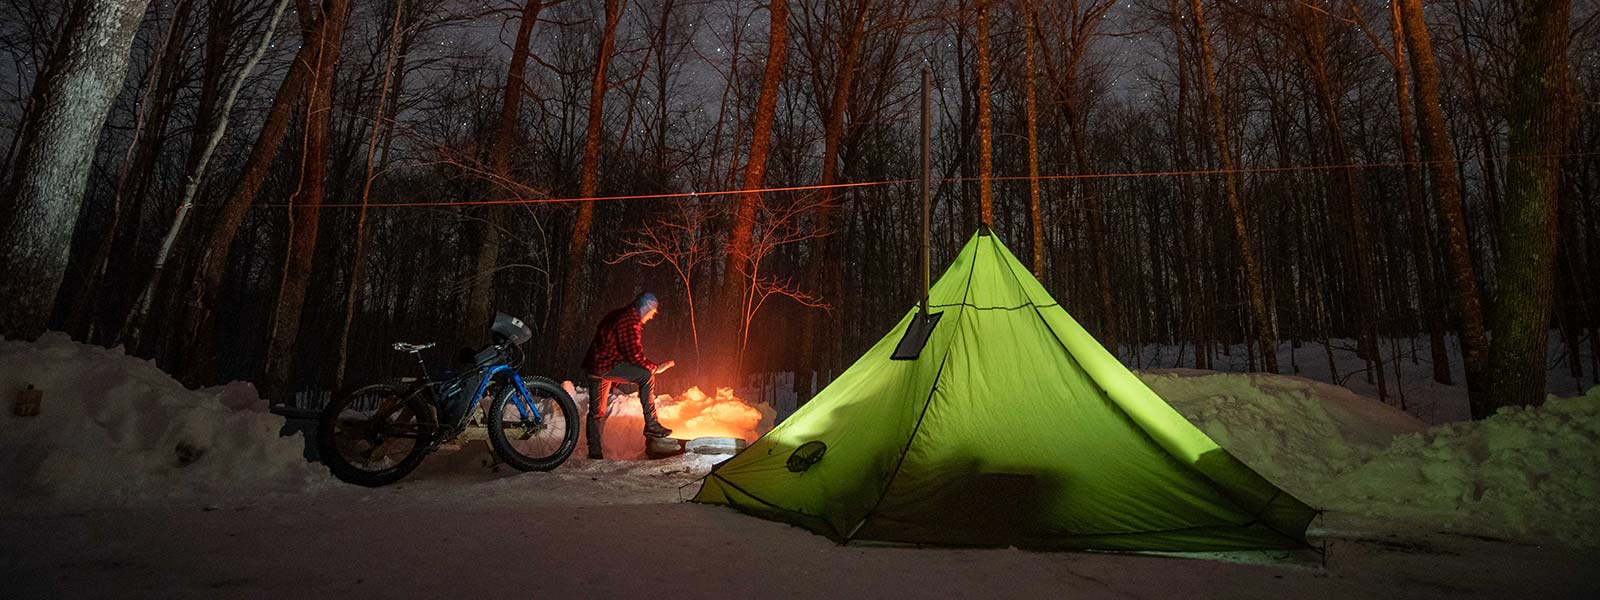 Full Spectrum Cycling #49 - Winter ROAM Camping Report and Complete Streets With Dave Schlabowske